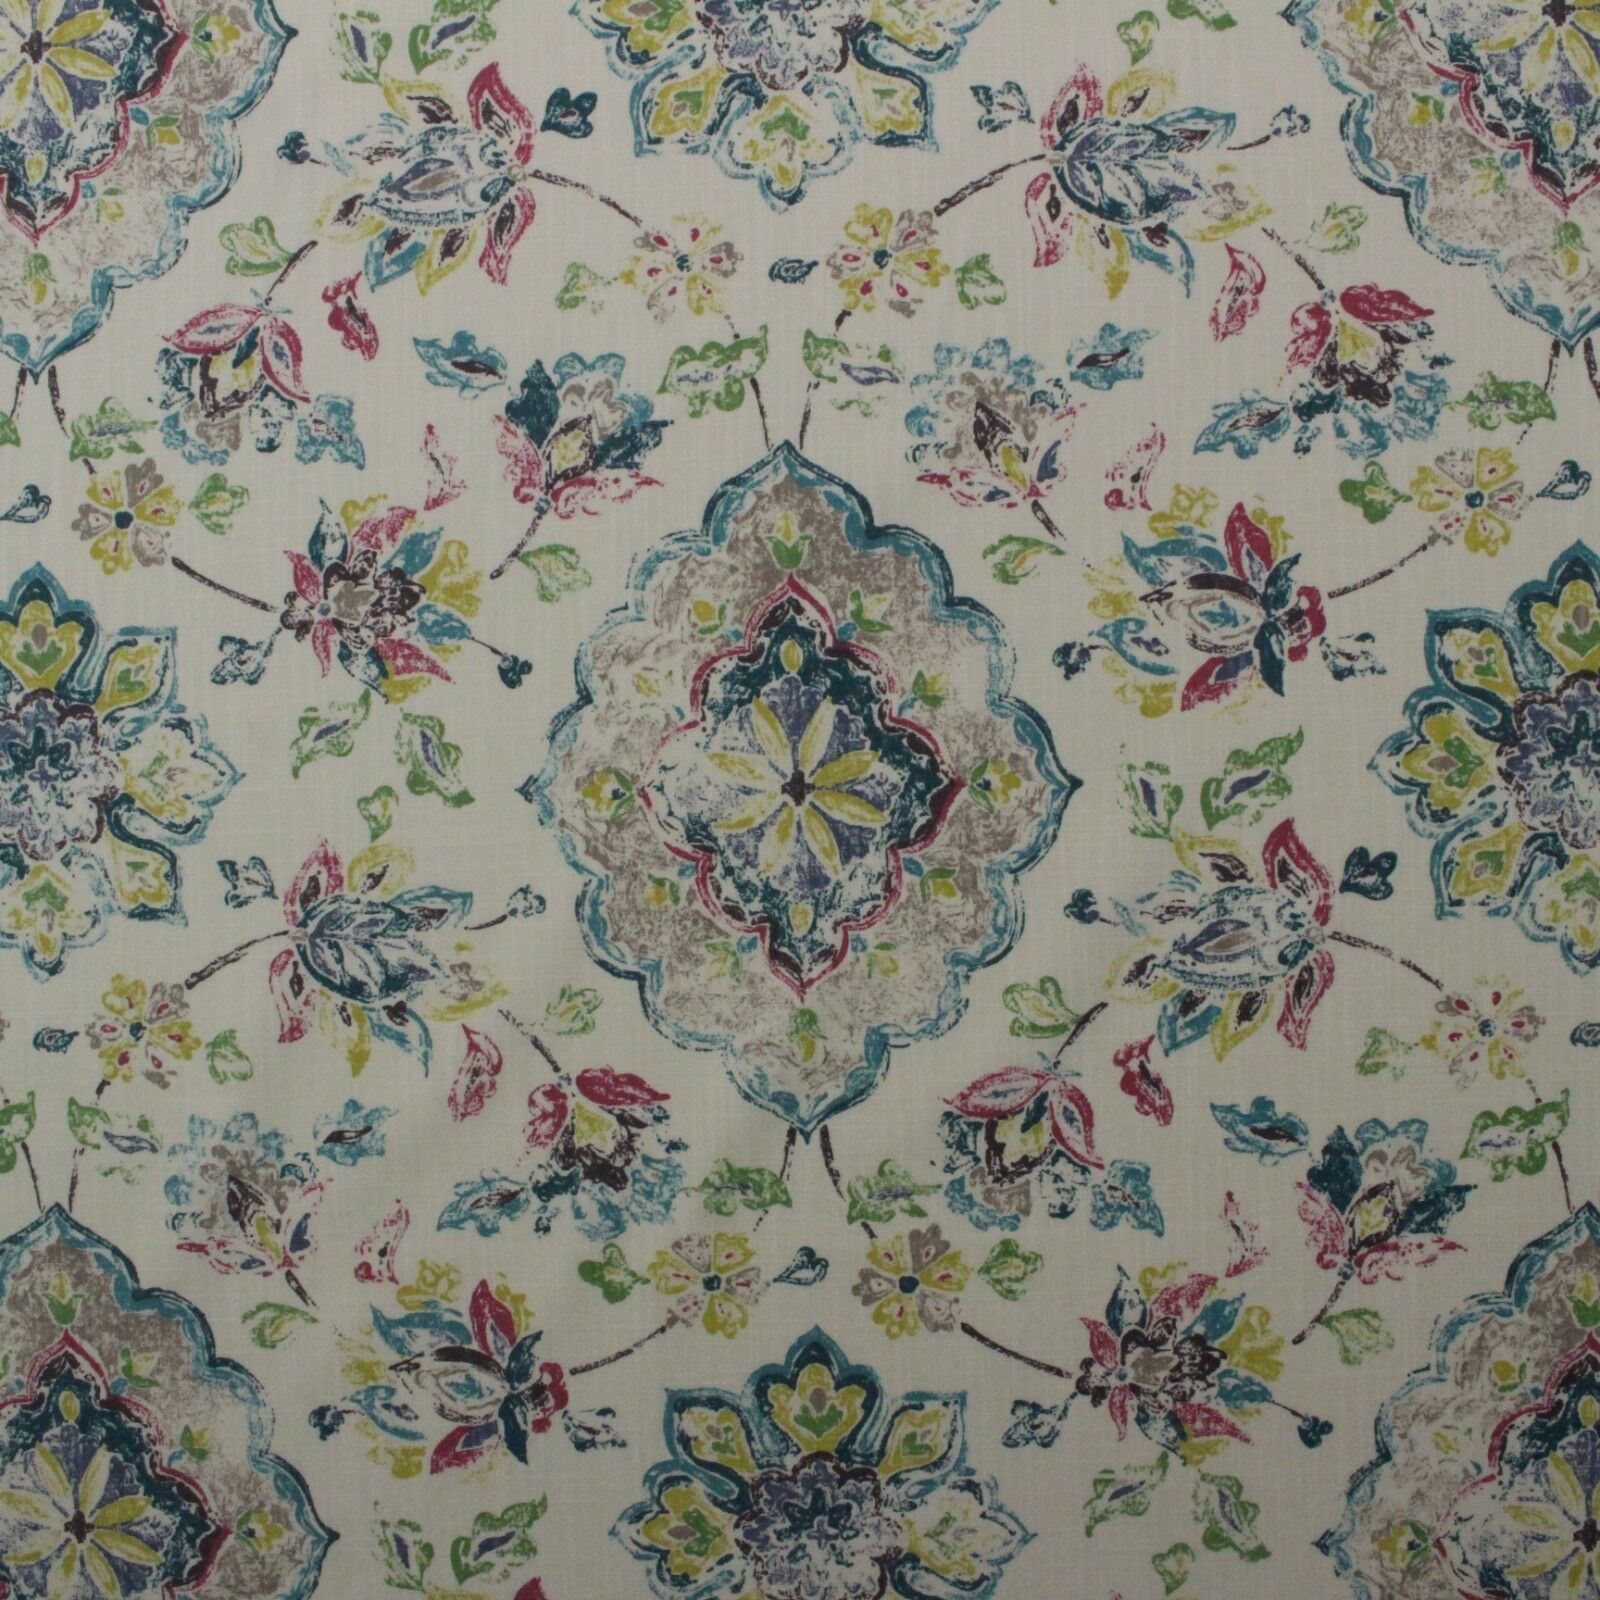 Primary image for P KAUFMANN RELIC TEAL BLUE FLORAL IKAT DAMASK MULTIUSE FABRIC BY YARD 54"W